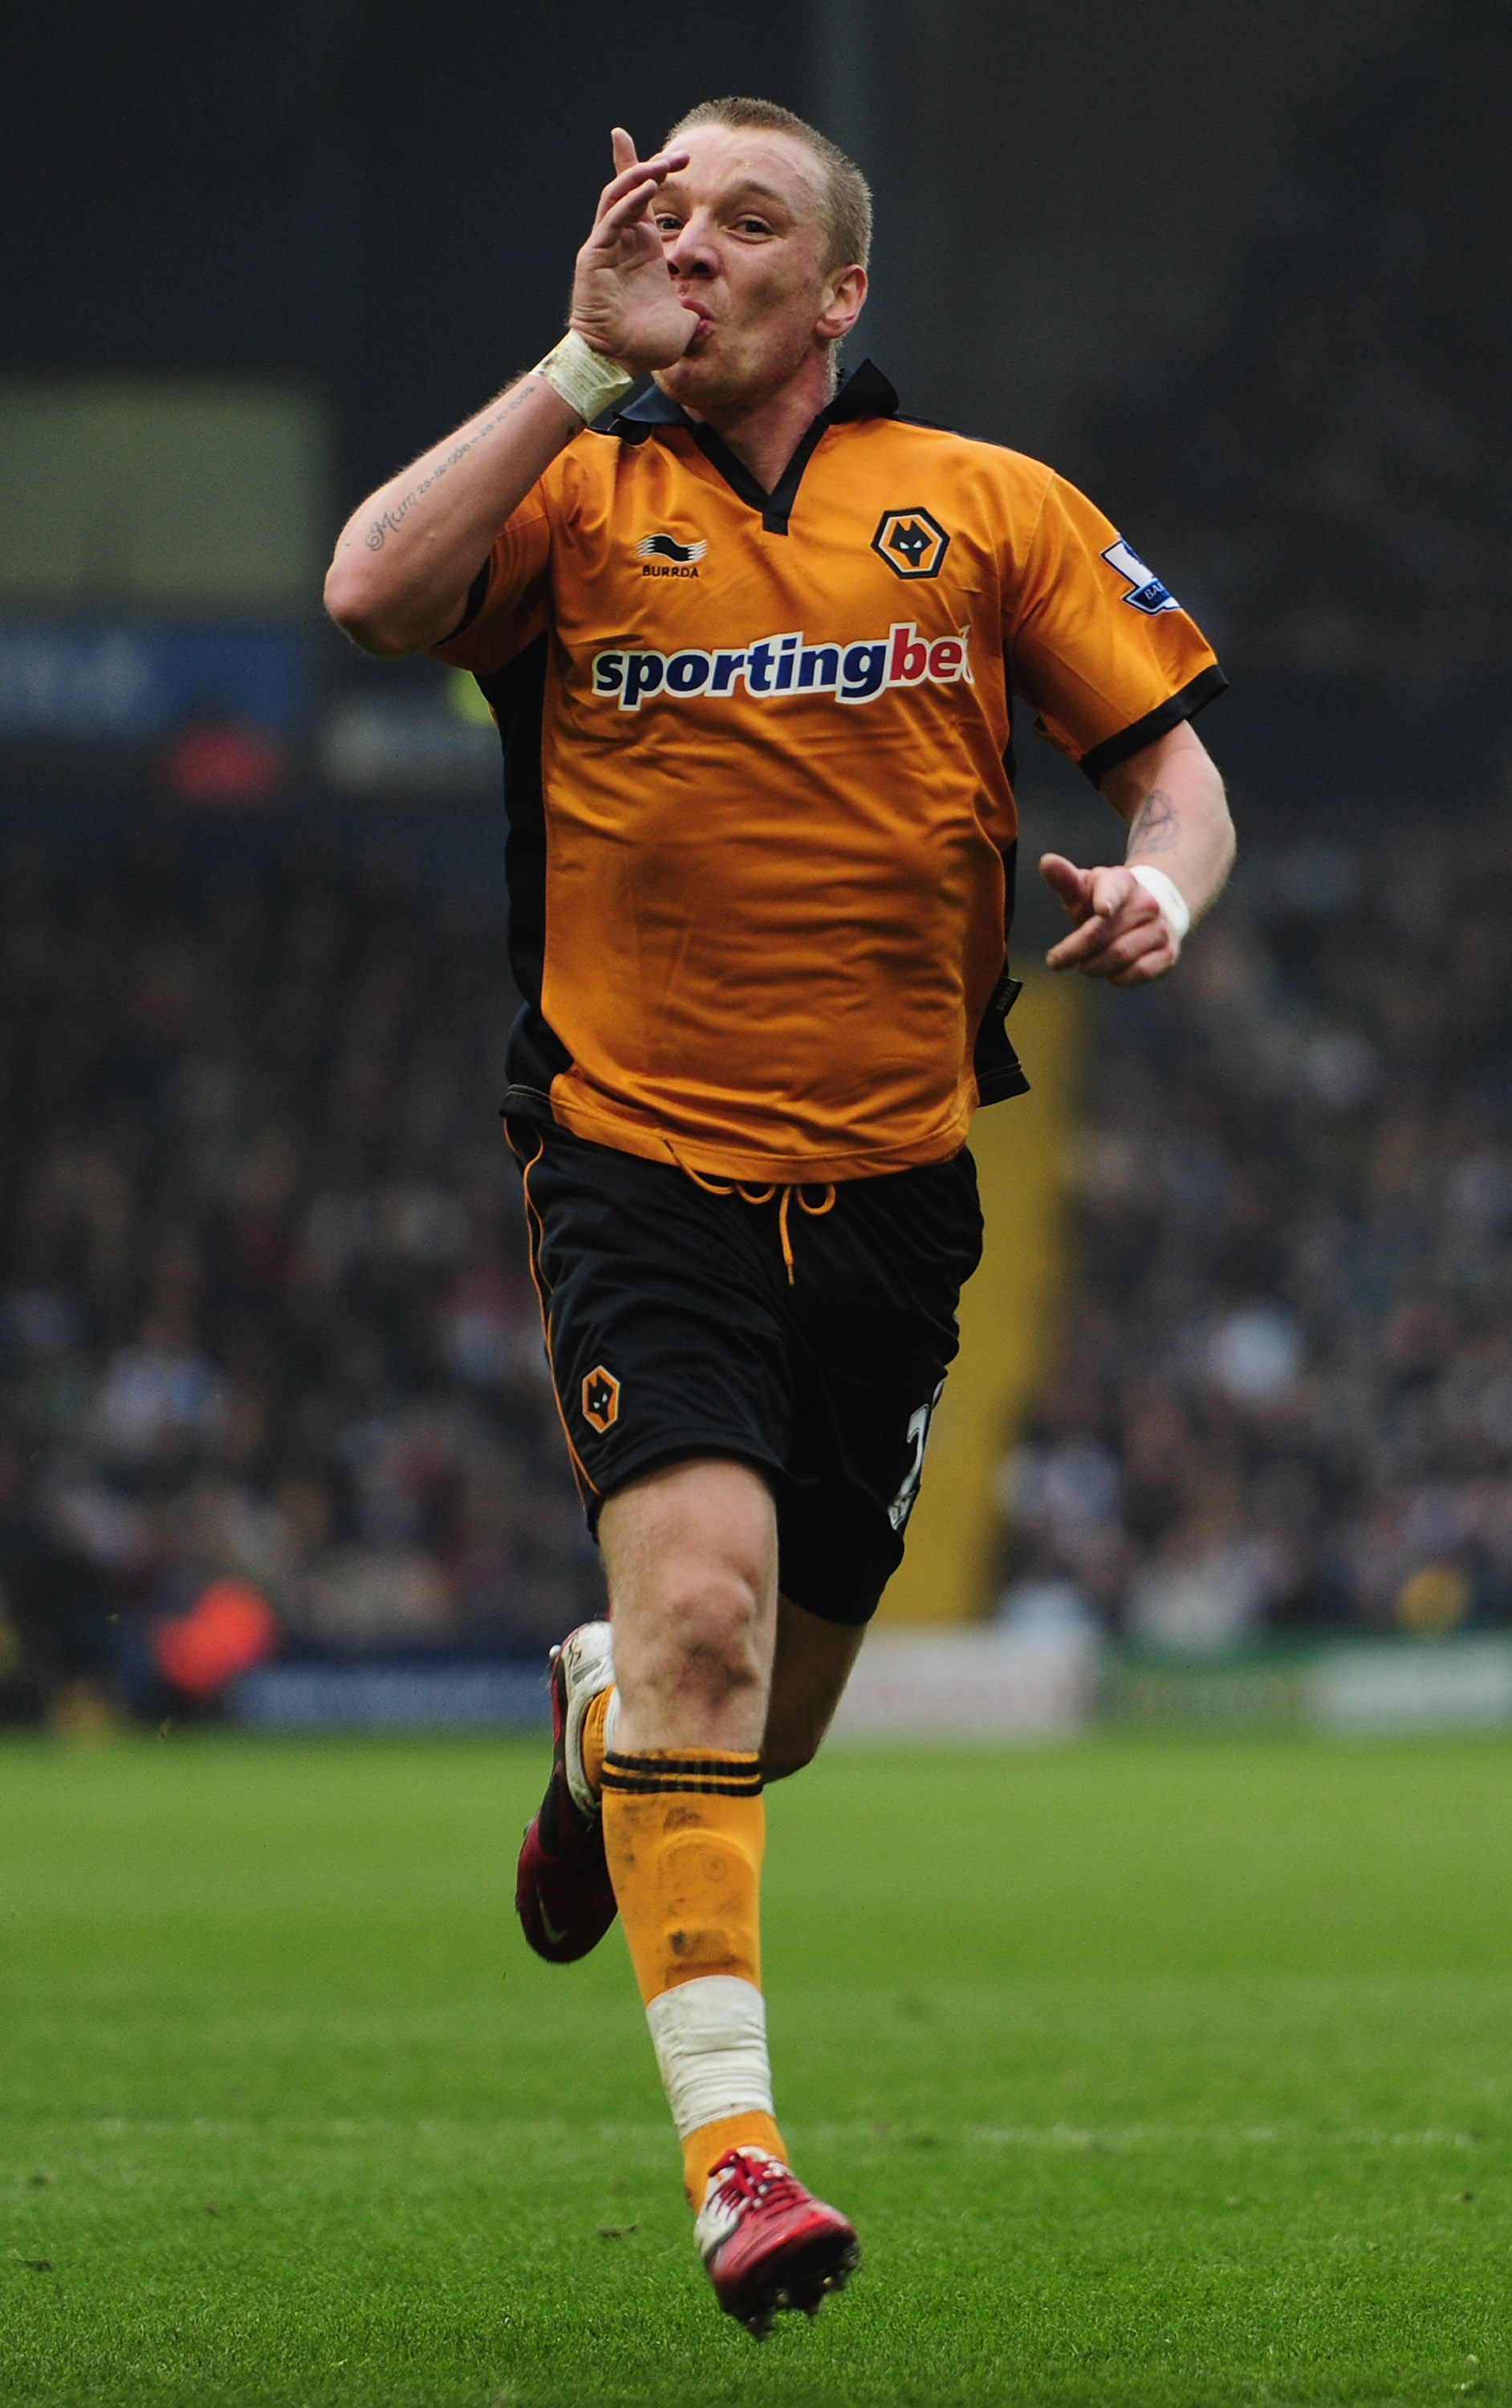 WEST BROMWICH, ENGLAND - FEBRUARY 20:  Jamie O'Hara of Wolverhampton Wanderers celebrates his goal during the Barclays Premier League match between West Bromwich Albion and Wolverhampton Wanderers at The Hawthorns on February 20, 2011 in West Bromwich, En